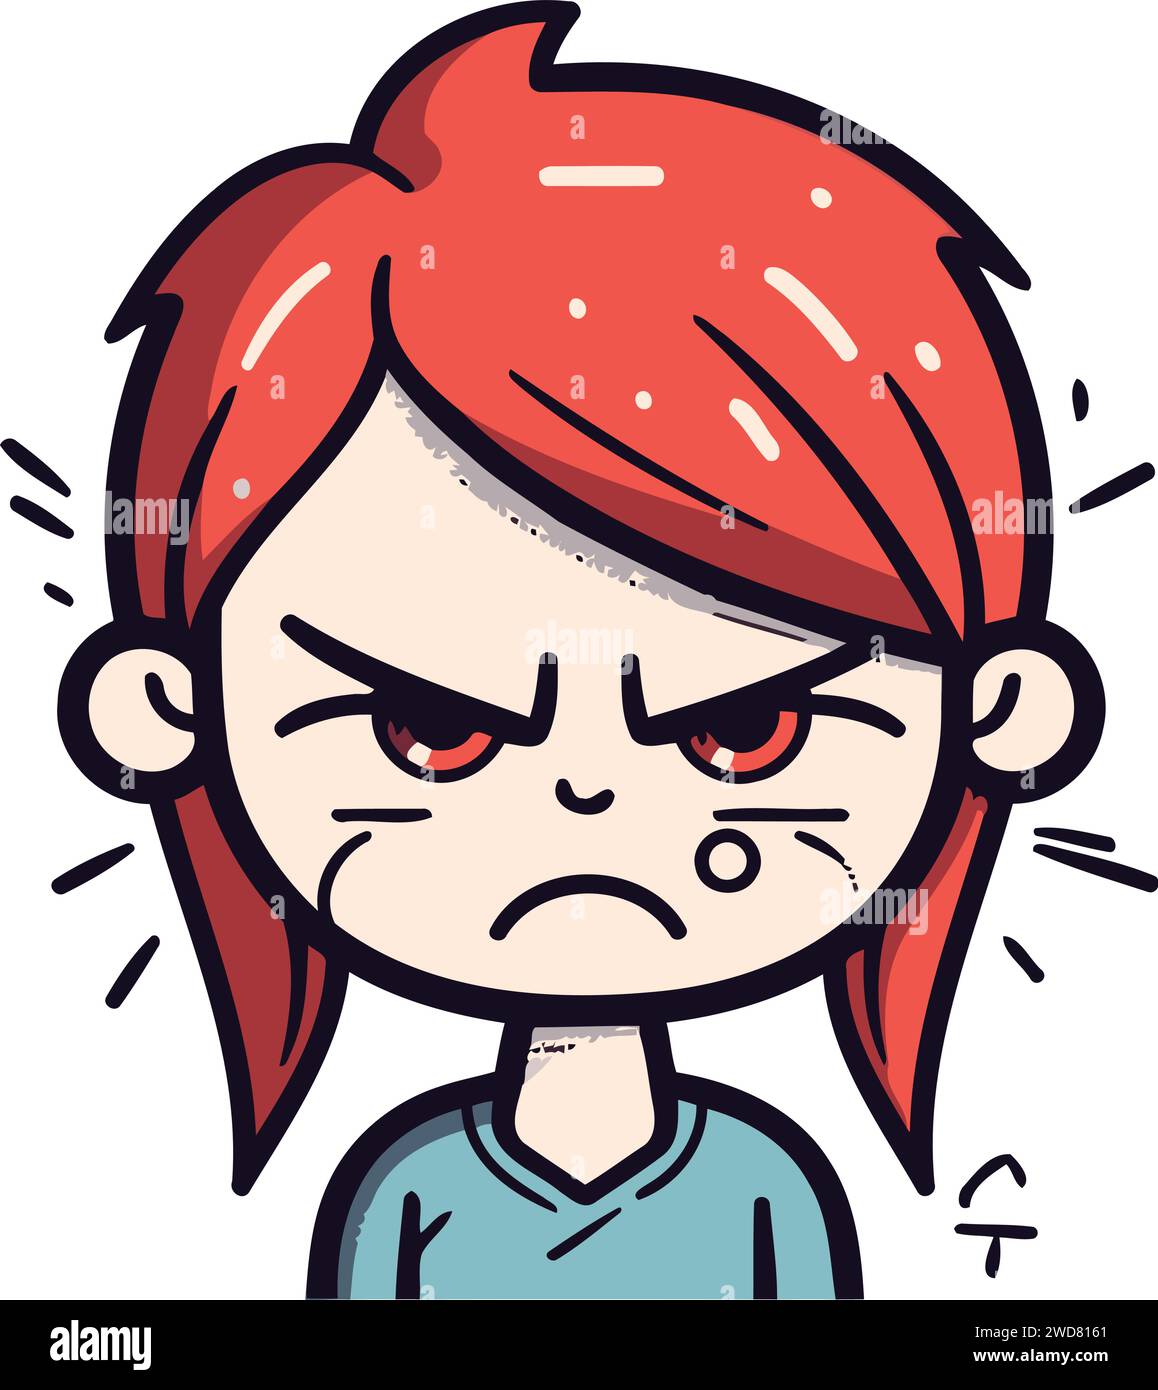 Angry girl with red hair. Vector illustration in cartoon style. Stock Vector